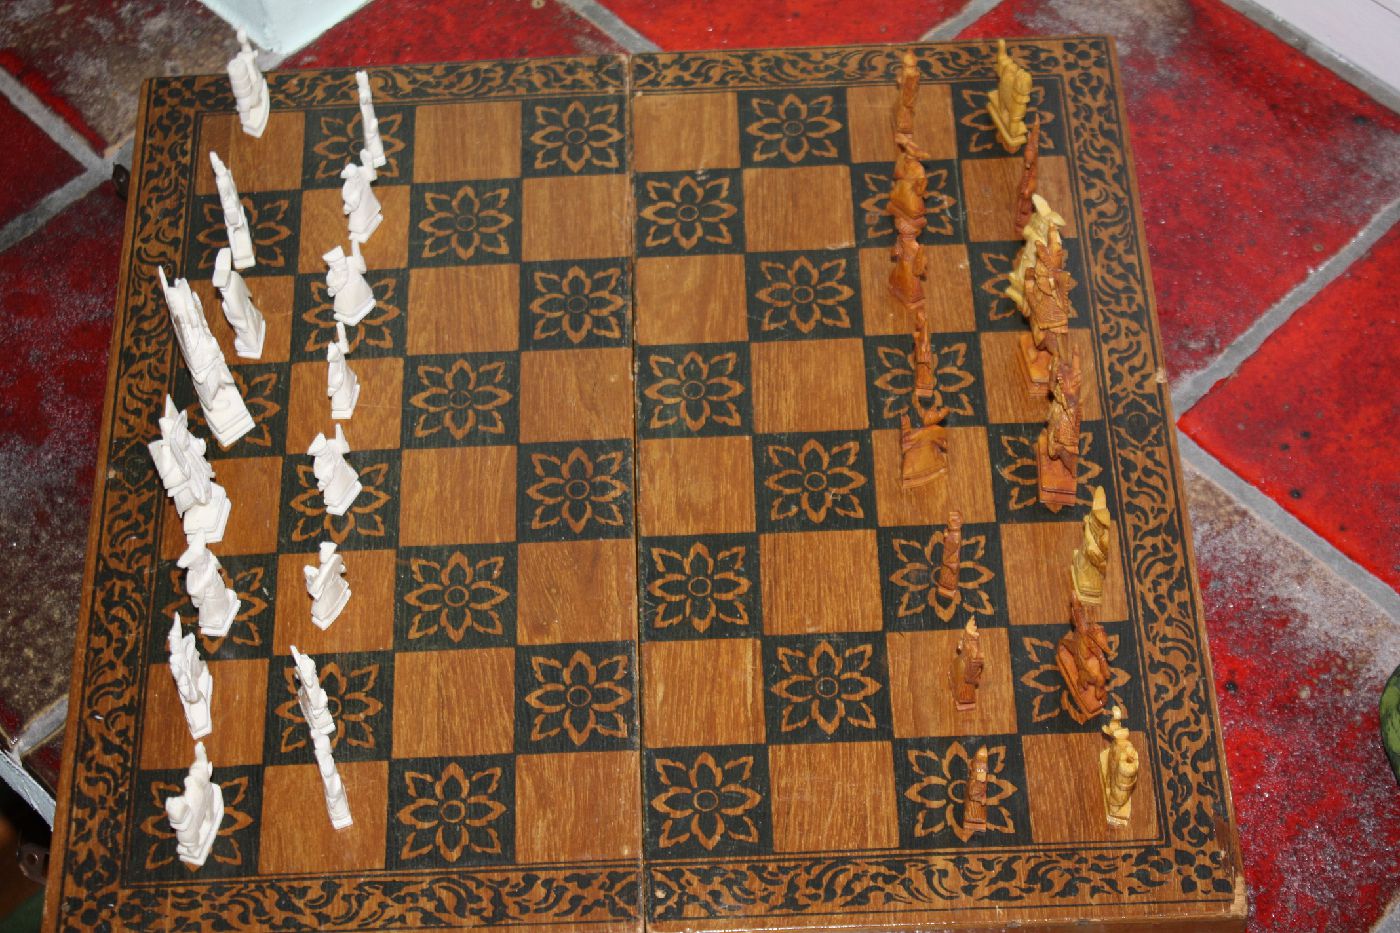 A 1920's Chinese handcarved ivory chess game with a wooden case serves as a fold-up playing board